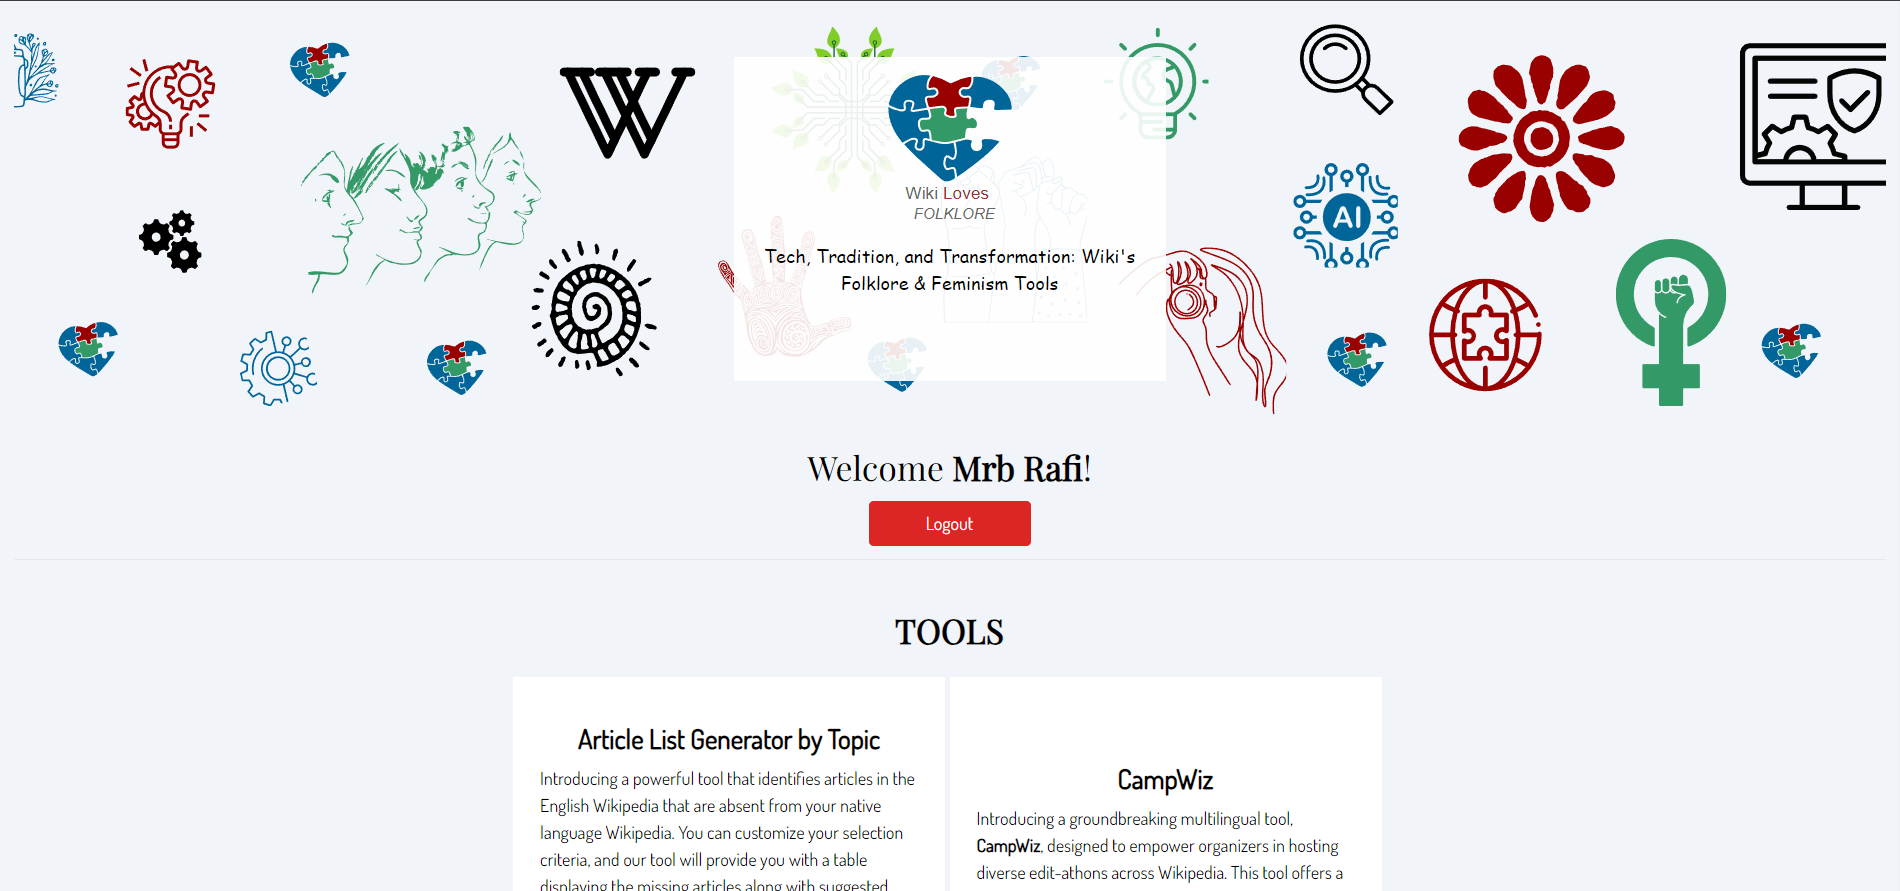 The new toolkit homepage